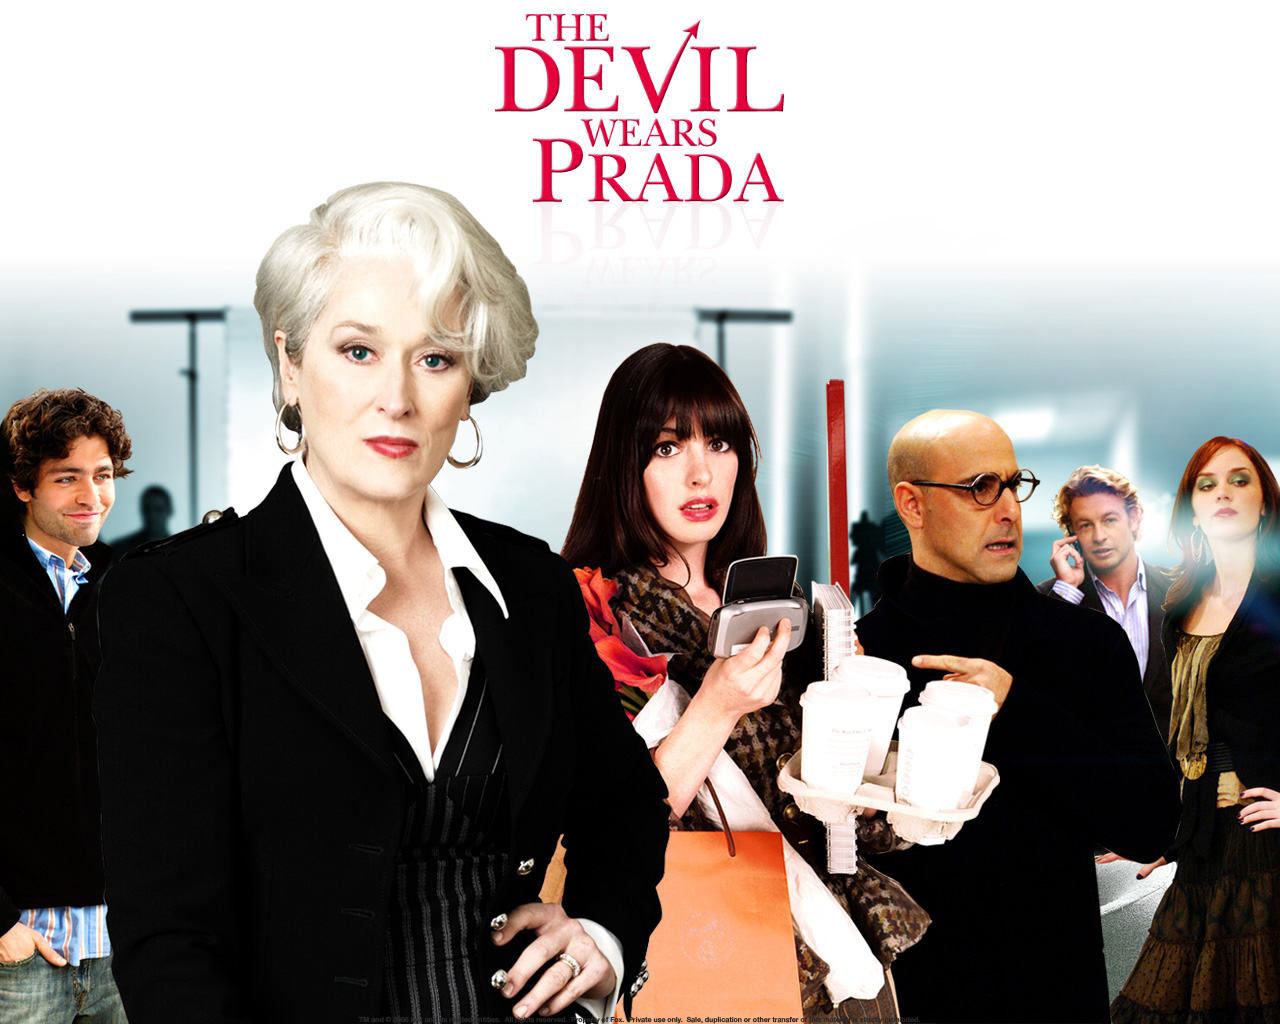 What I Learned About Fandoms & Life from The Devil Wears Prada